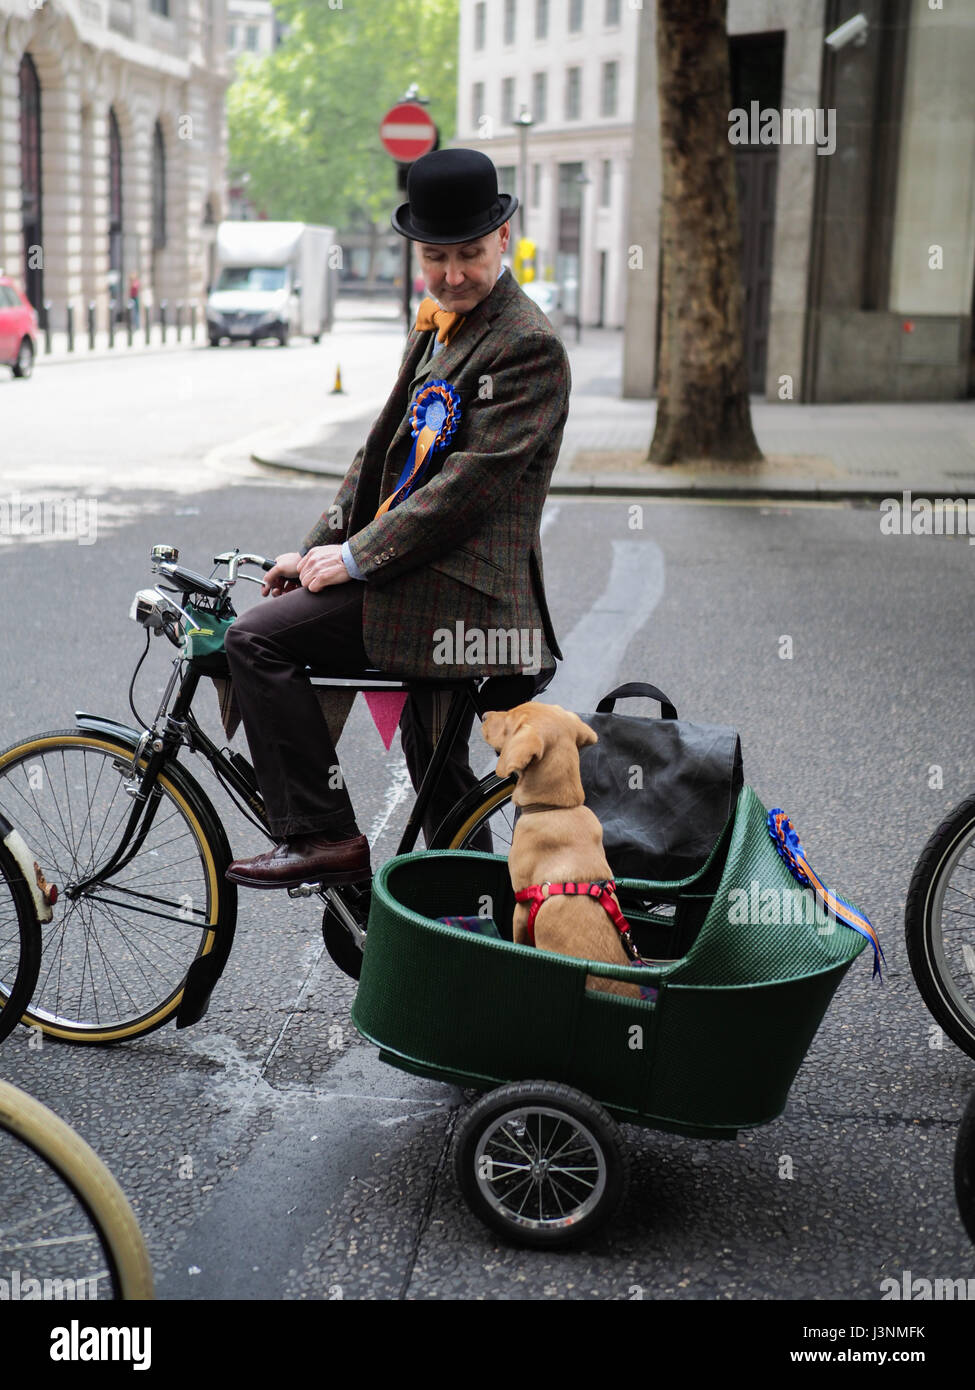 London, UK. 6th May, 2017.  a vintage male cyclist looks at his dog in a sidecar as the wait on the road. The dog is a sidecar. The annual London bicycle ride is a stylish event in London for nearly 900 riders, dressed in vintage or stylish tweed or other traditional outfits. This is the ninth year of the Tweed Run, which began in London in 2009 Credit: Doozzi Photography/Alamy Live News Stock Photo